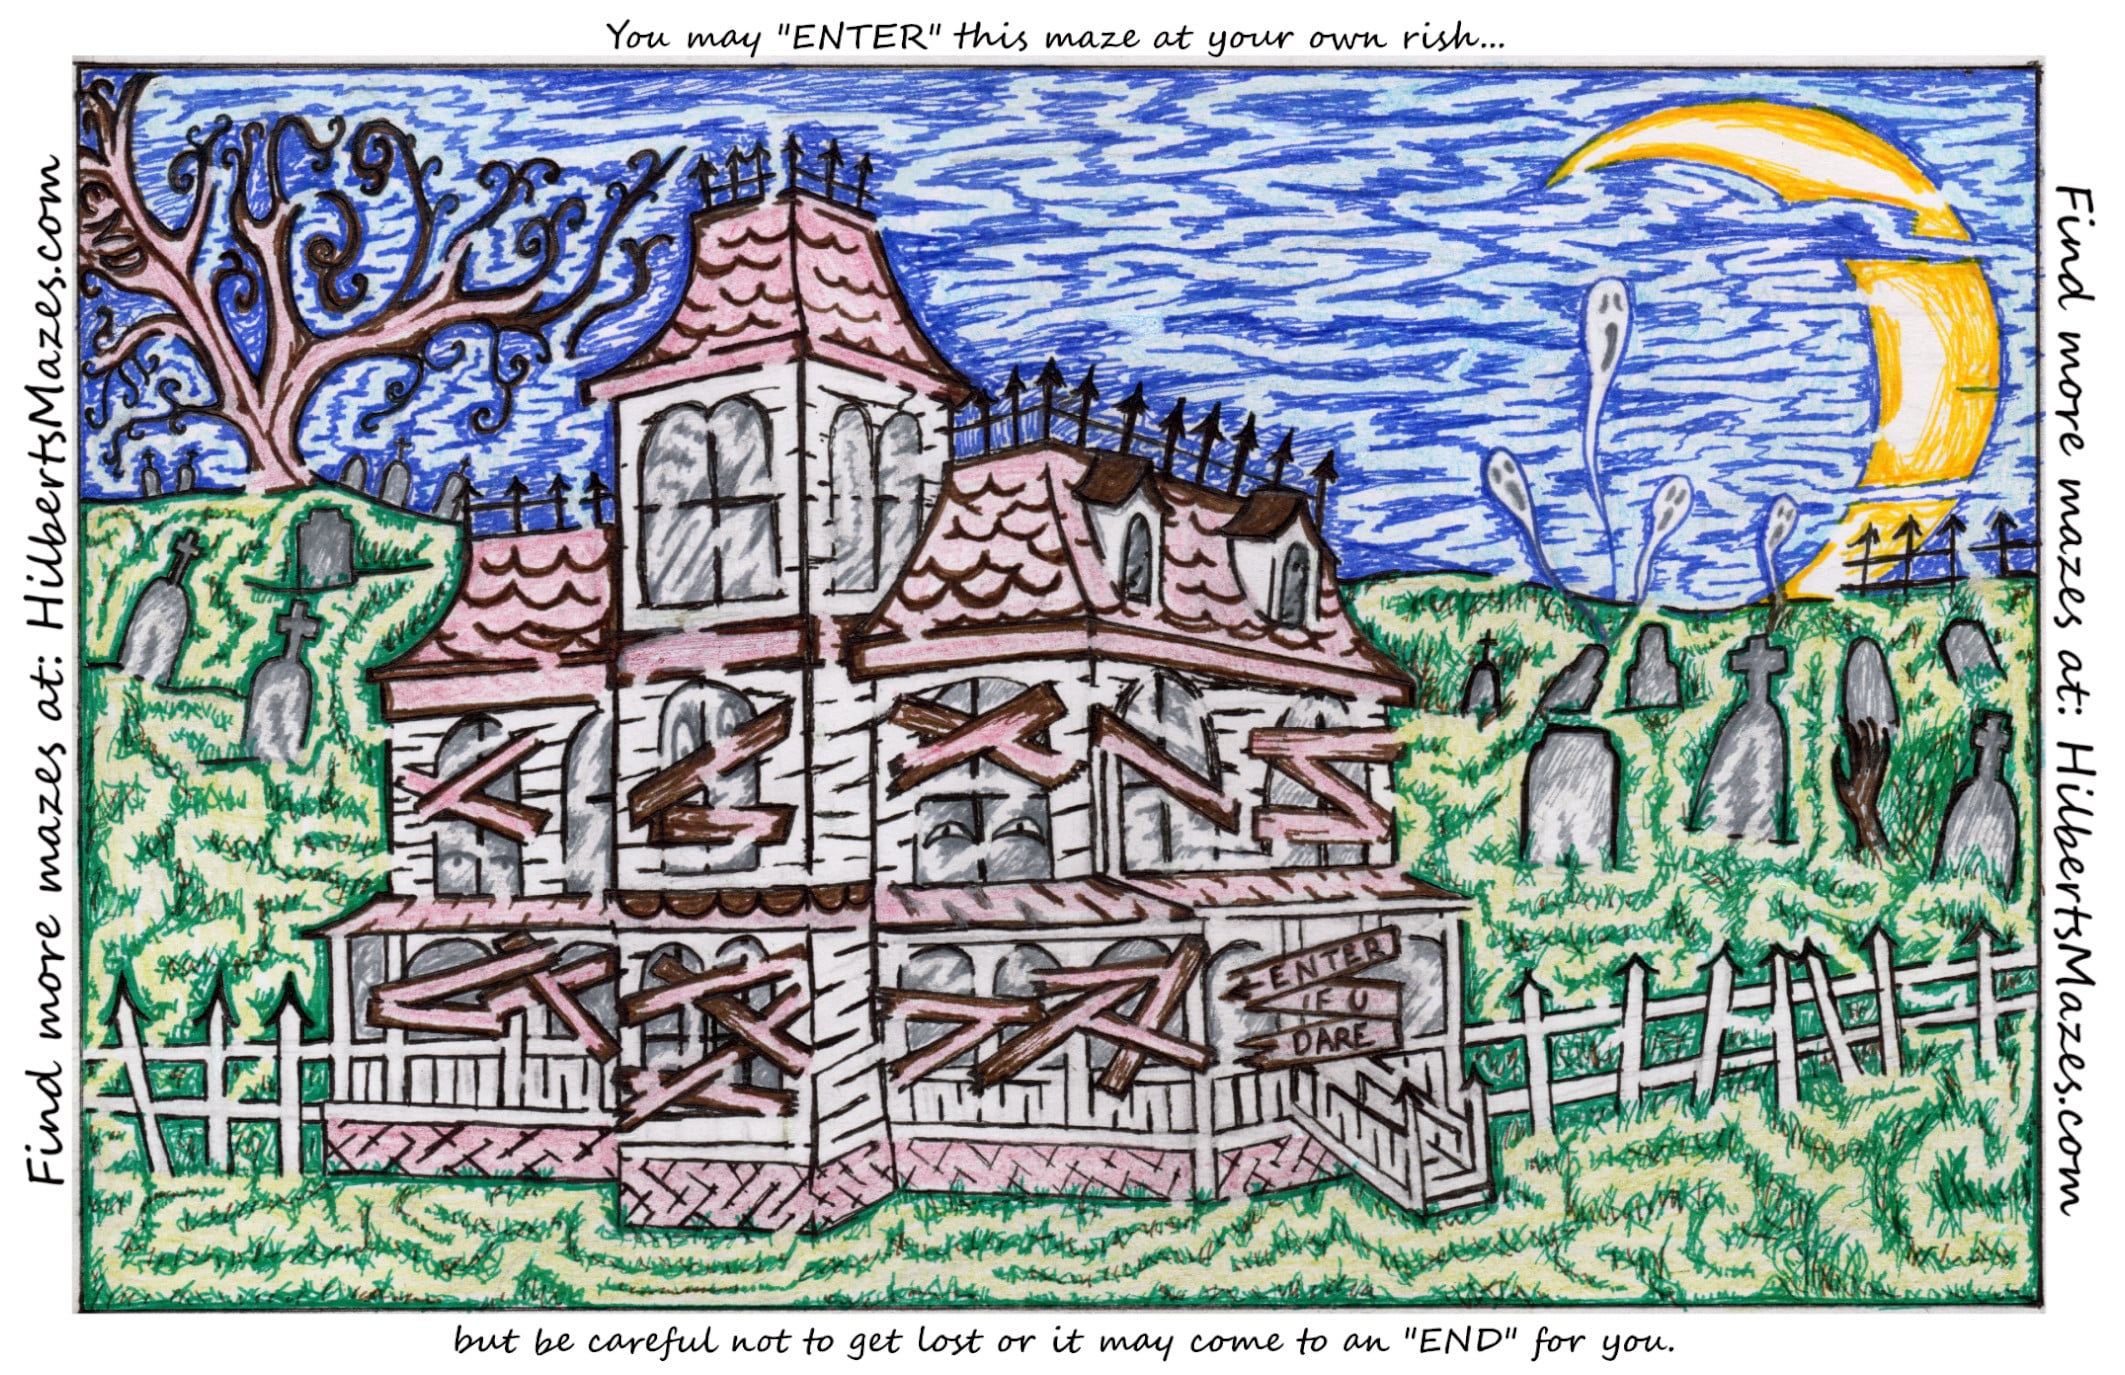 Free Printable Hand Drawn Haunted House Maze. Easily downloadable and printable PDF format. Great Mazes for both kids & adults very challenging but fun.